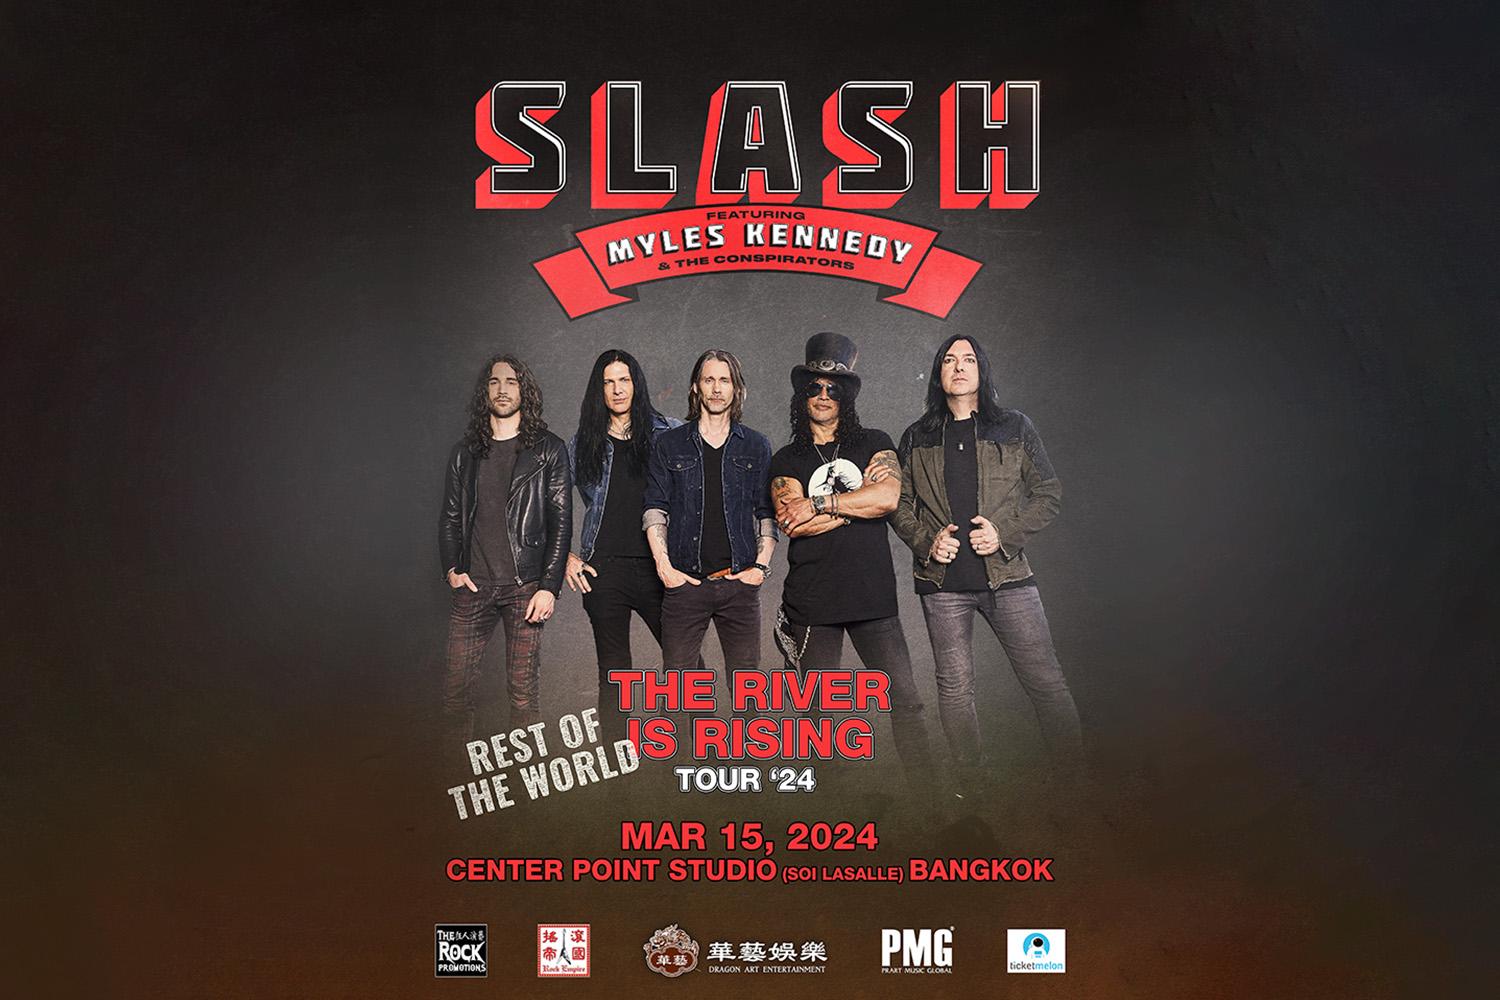 SLASH-Featuring-Myles-Kennedy-and-The-Conspirators-The-River-is-Rising-Tour-24-BKK-SPACEBAR-Hero.jpg